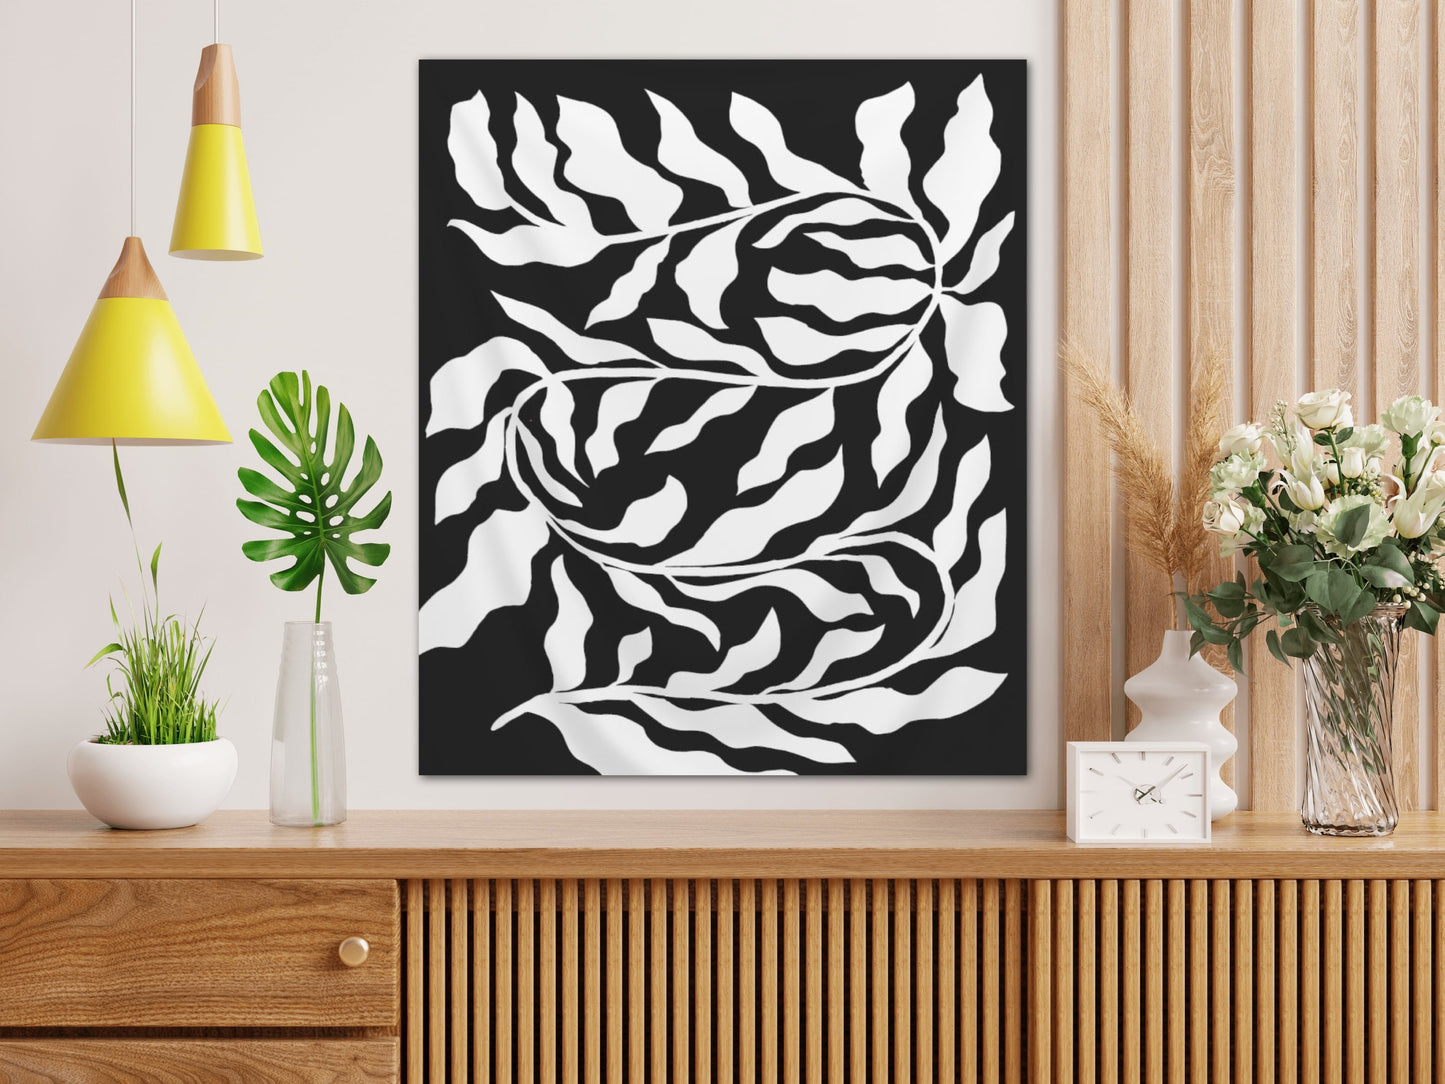 Black and White Wall Tapestry